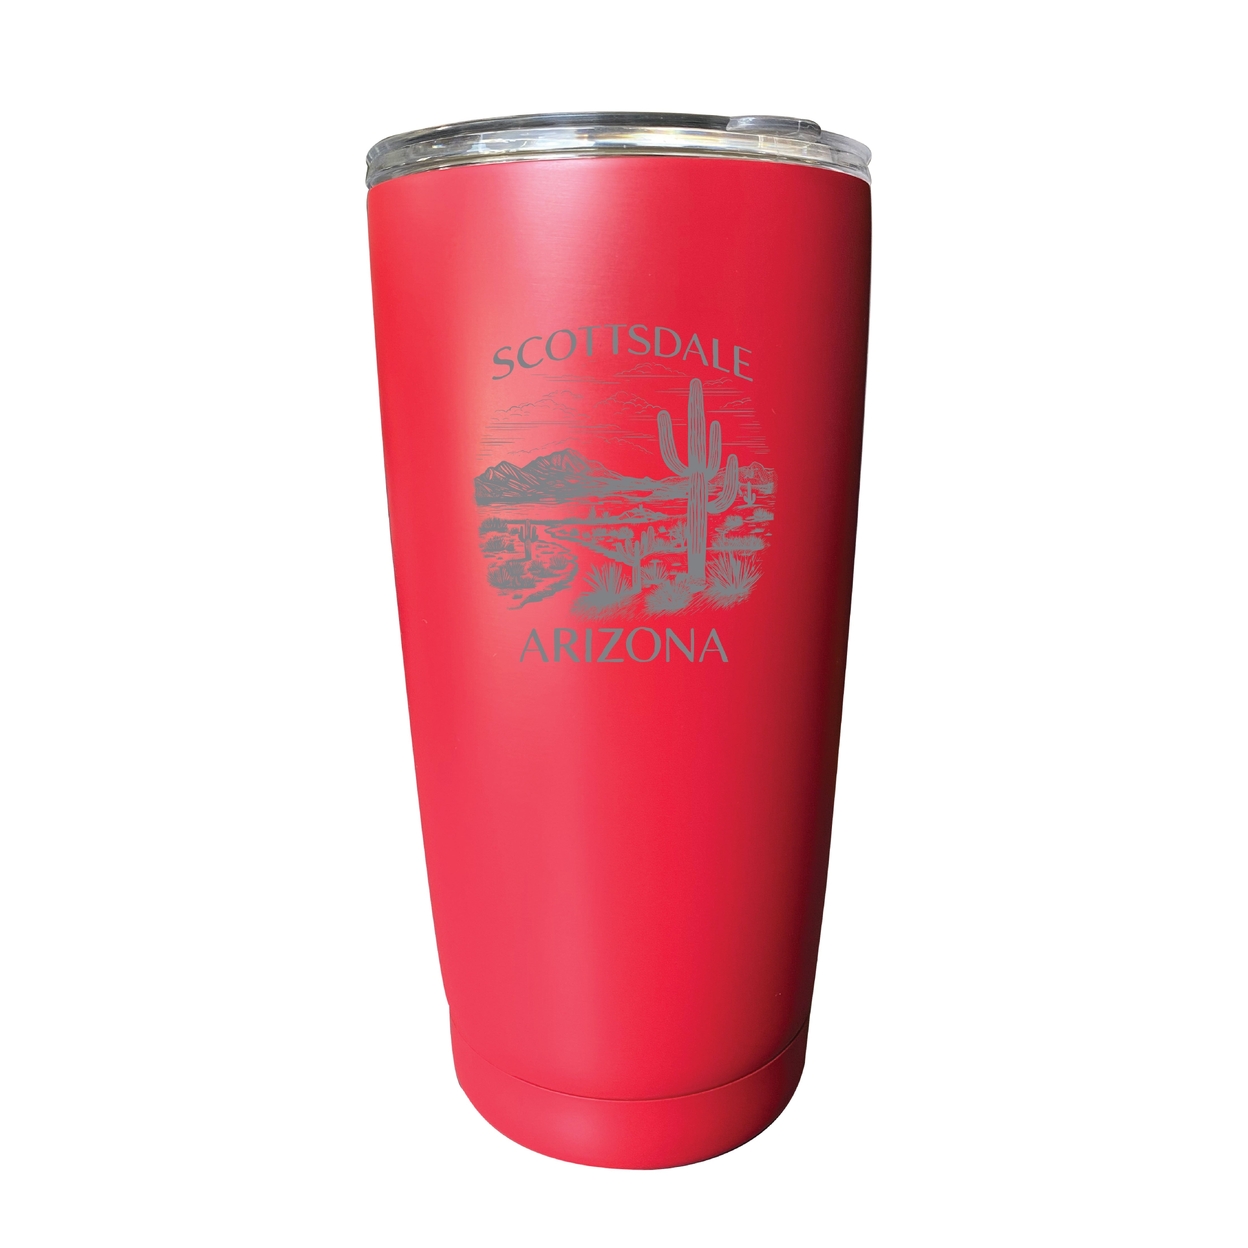 Scottsdale Arizona Souvenir 16 Oz Engraved Stainless Steel Insulated Tumbler - Pink,,4-Pack